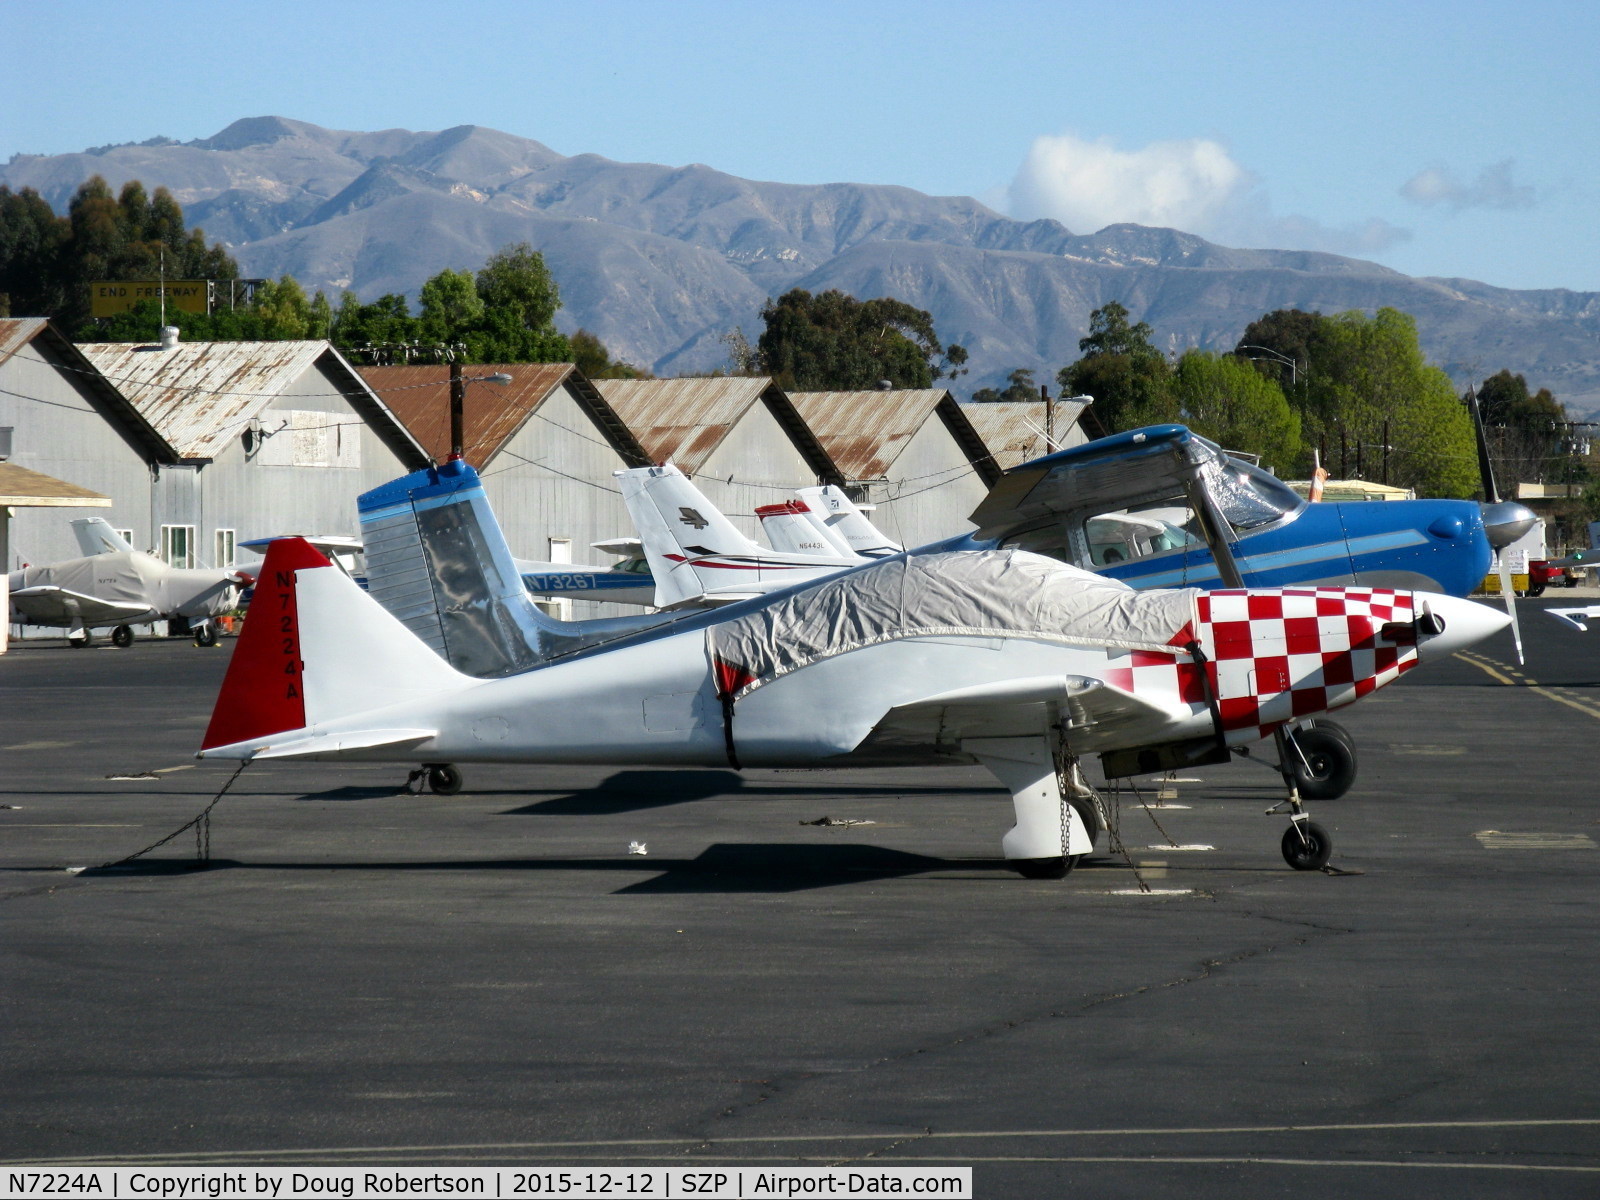 N7224A, 1998 Osprey GP-4 C/N 8, 1998 Baum PEREIRA GP4, Lycoming IO-360-A1A 200 Hp, 240 mph cruise, 2,200 fpm rate of climb, 1,200 mile range, retractable gear speedster